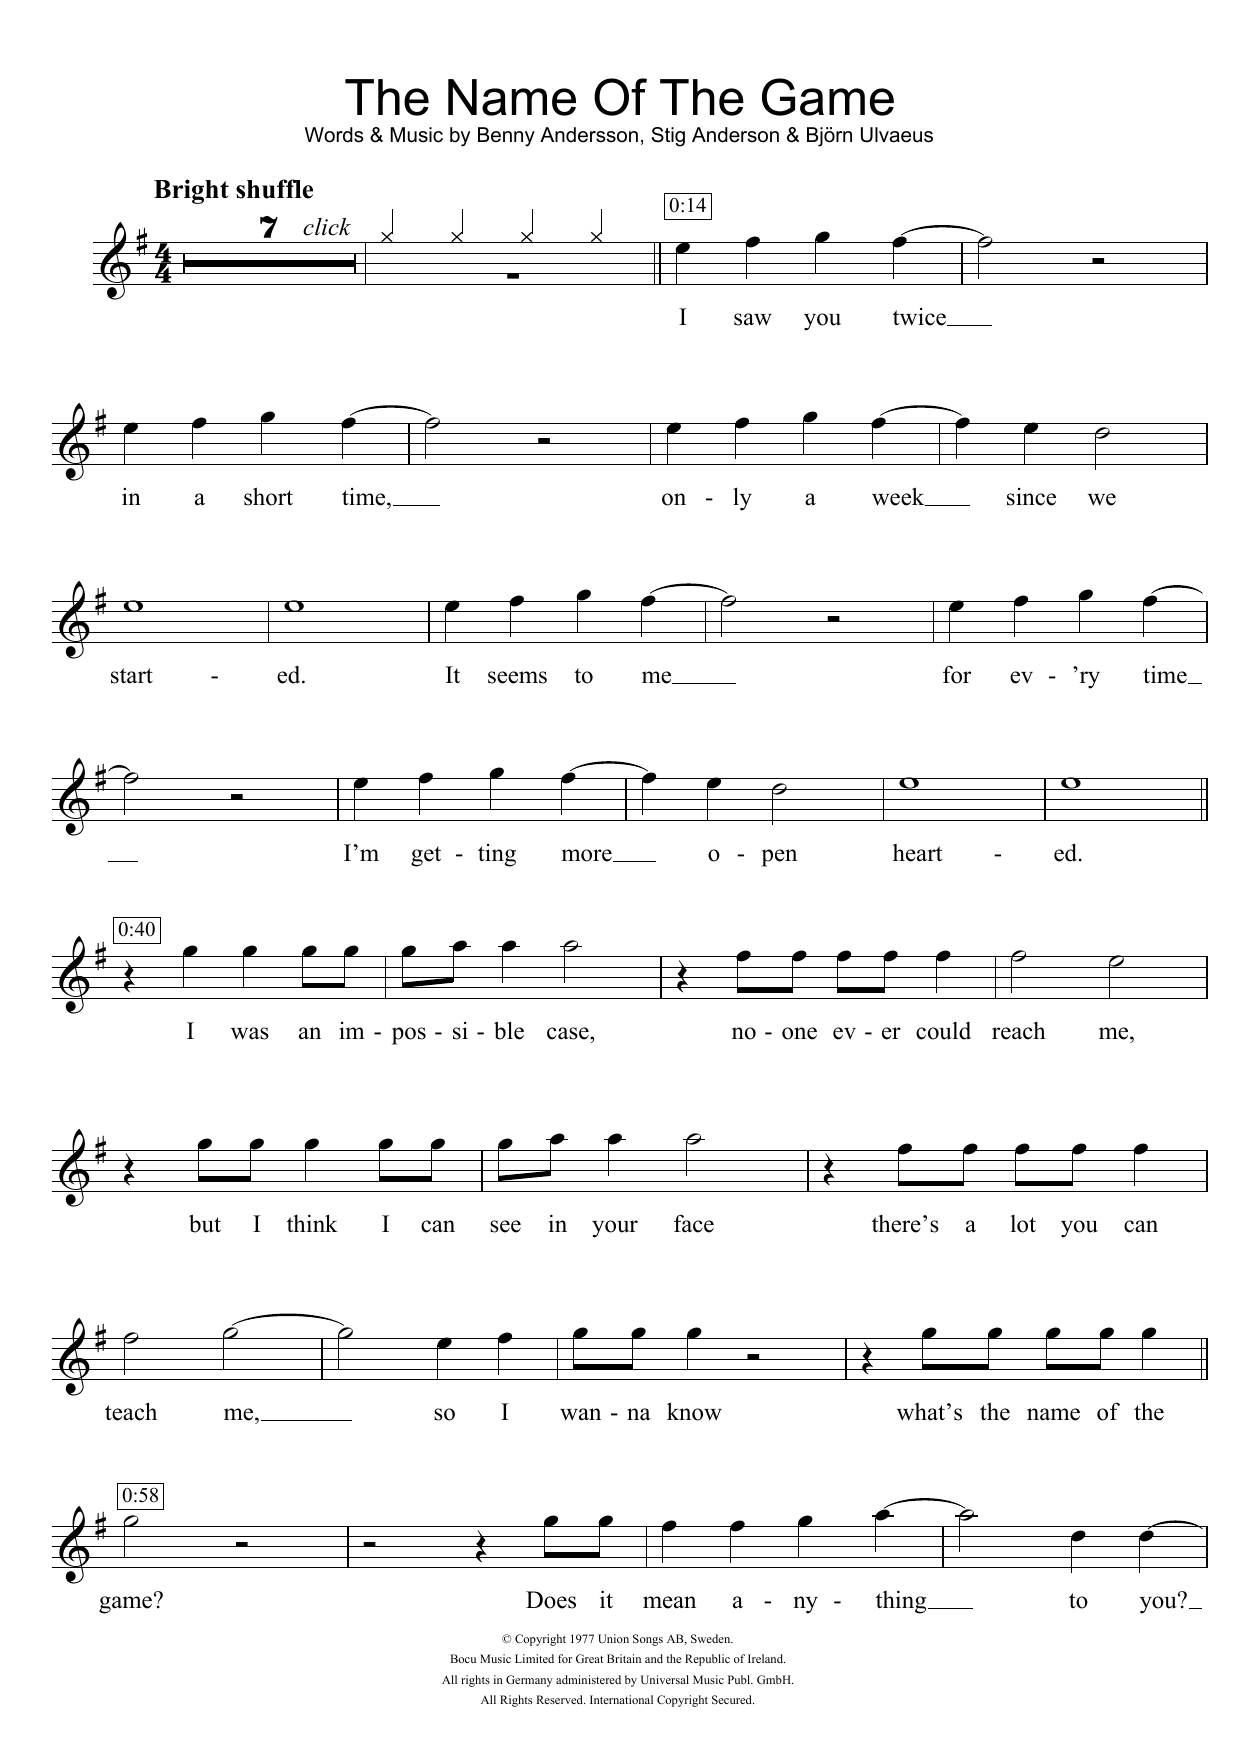 Download ABBA The Name Of The Game Sheet Music